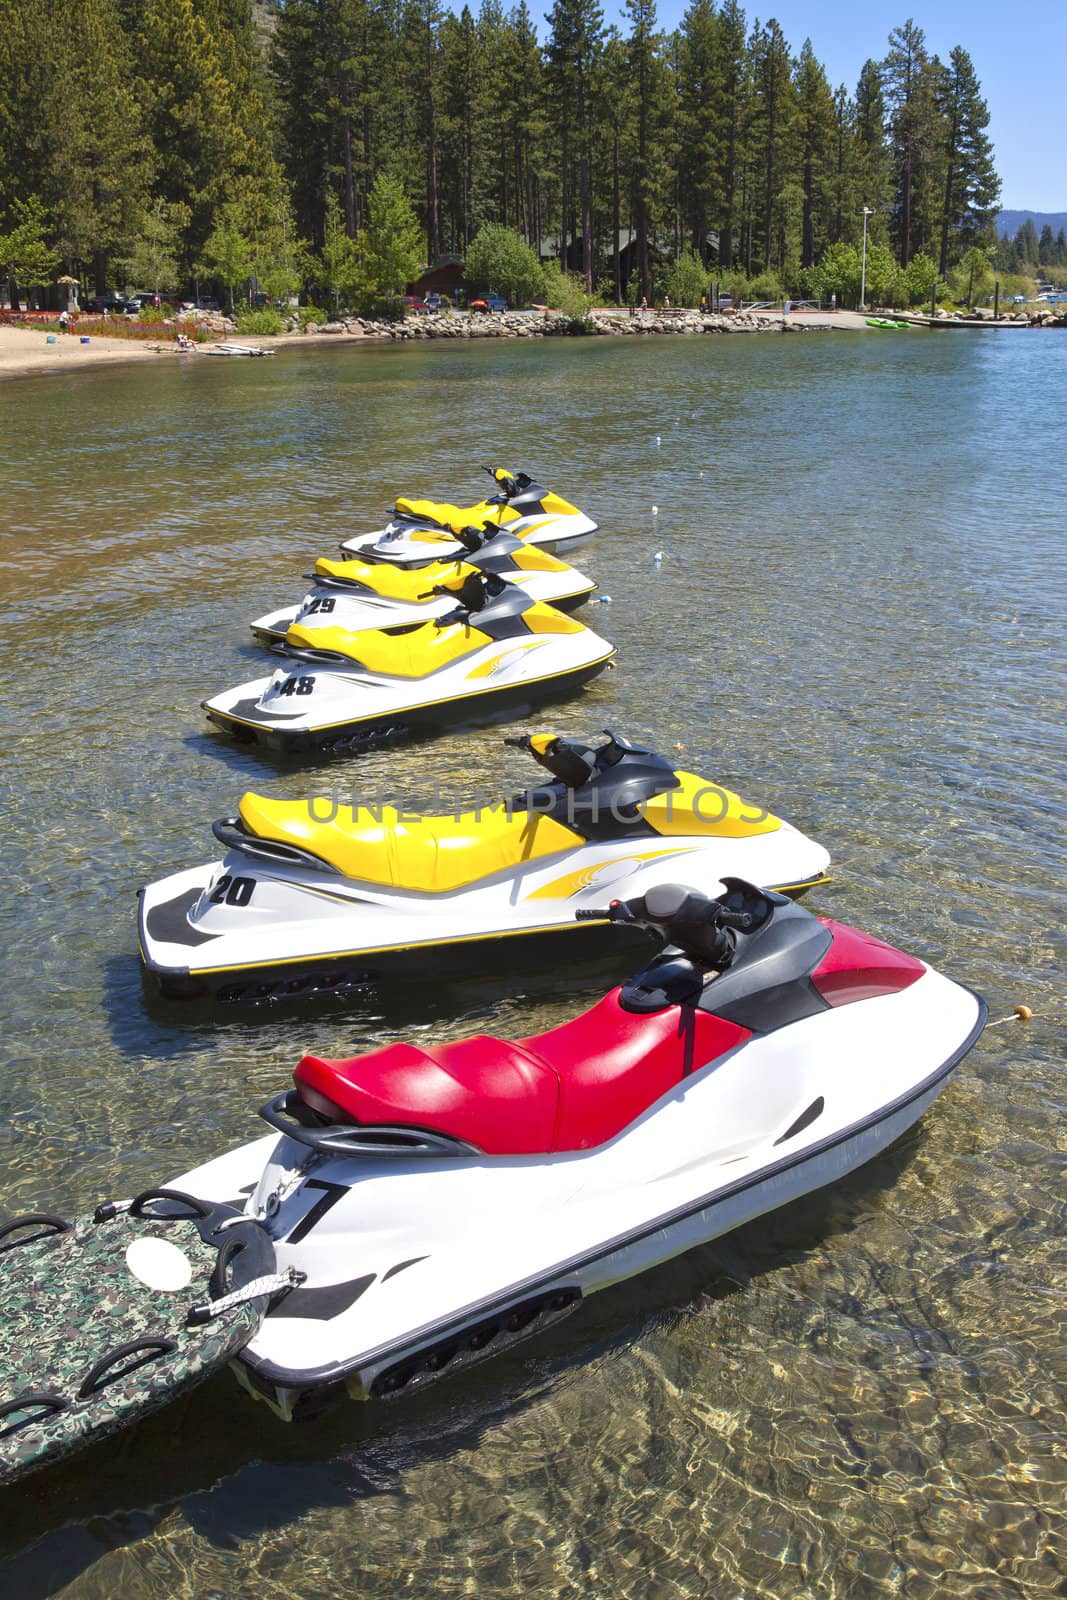 Water scooters in lake Tahoe, CA. by Rigucci